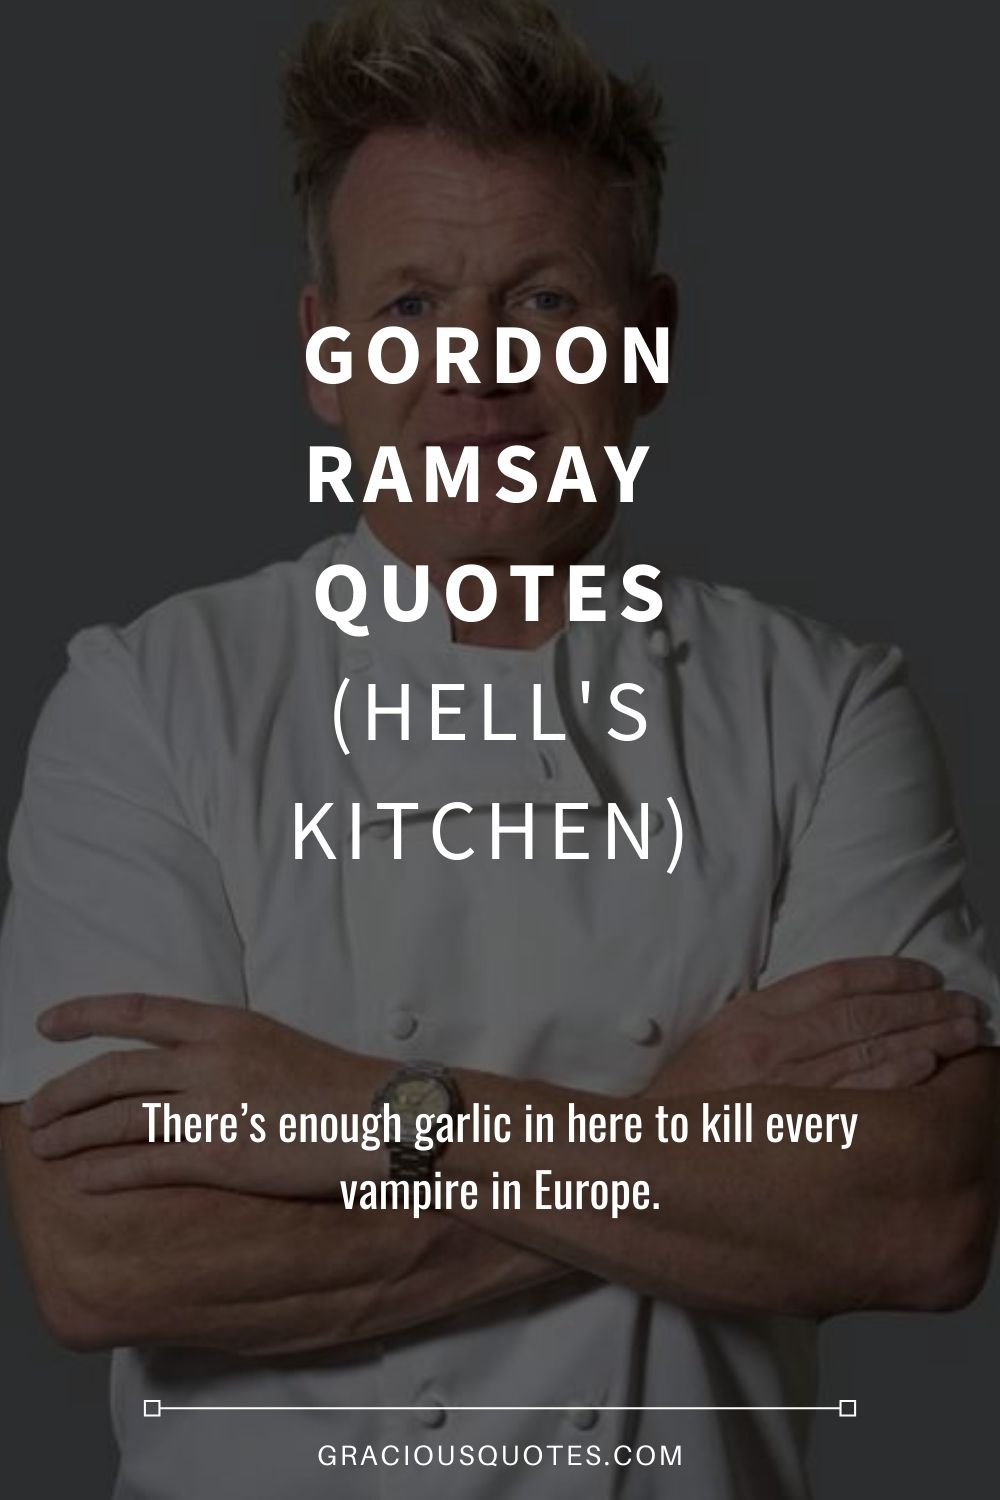 Gordon Ramsay Quotes (HELL'S KITCHEN) - Gracious Quotes